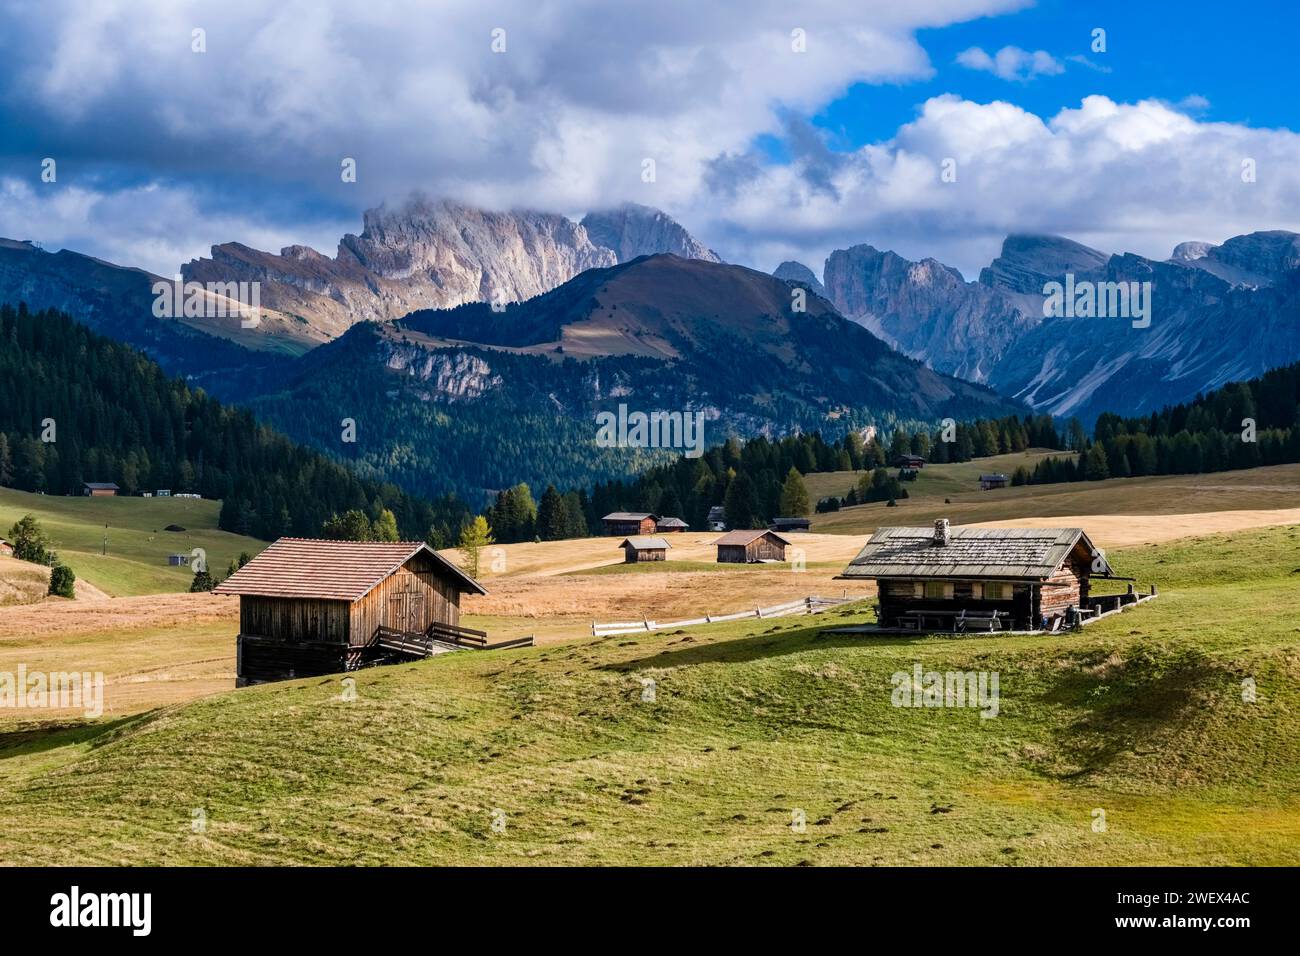 Hilly agricultural countryside with wooden huts and harvested pastures at Seiser Alm, Alpe di Siusi, in autumn, Odle group in the distance. Kastelruth Stock Photo